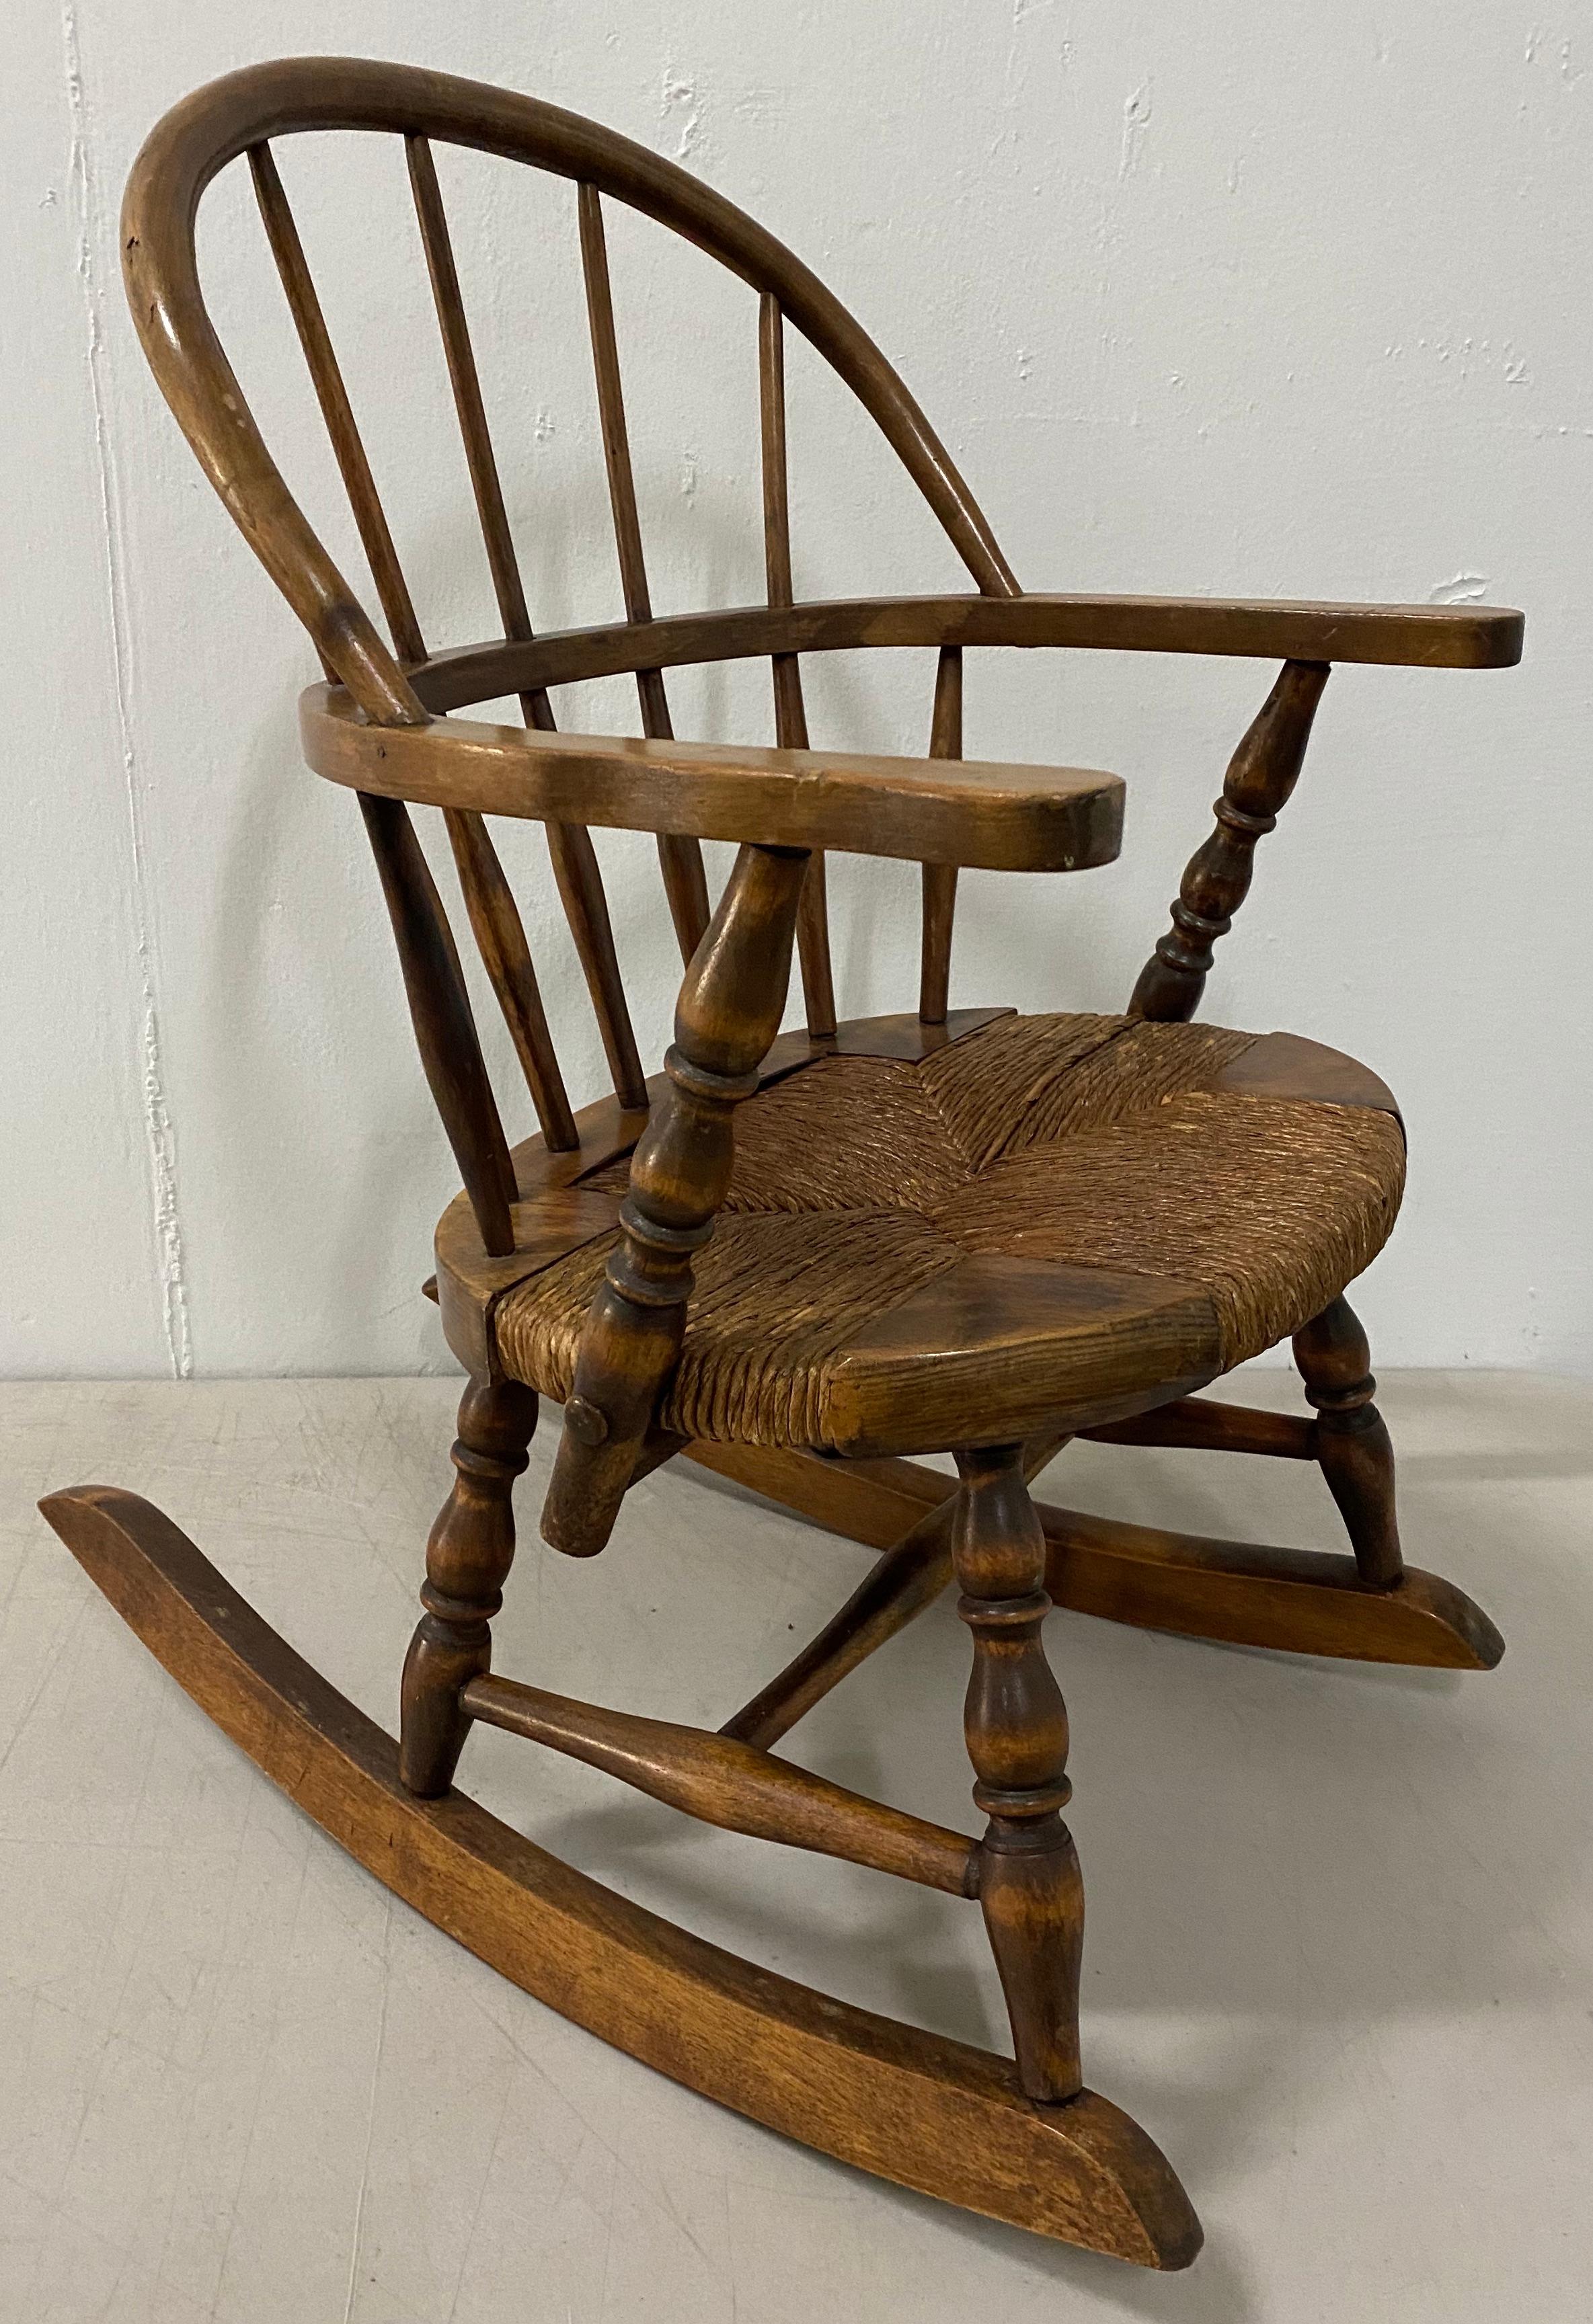 Late 19th century child's Windsor rocking chair

Custom made rocking chair with reed woven seat

Measures: 16 wide at the arms x 14